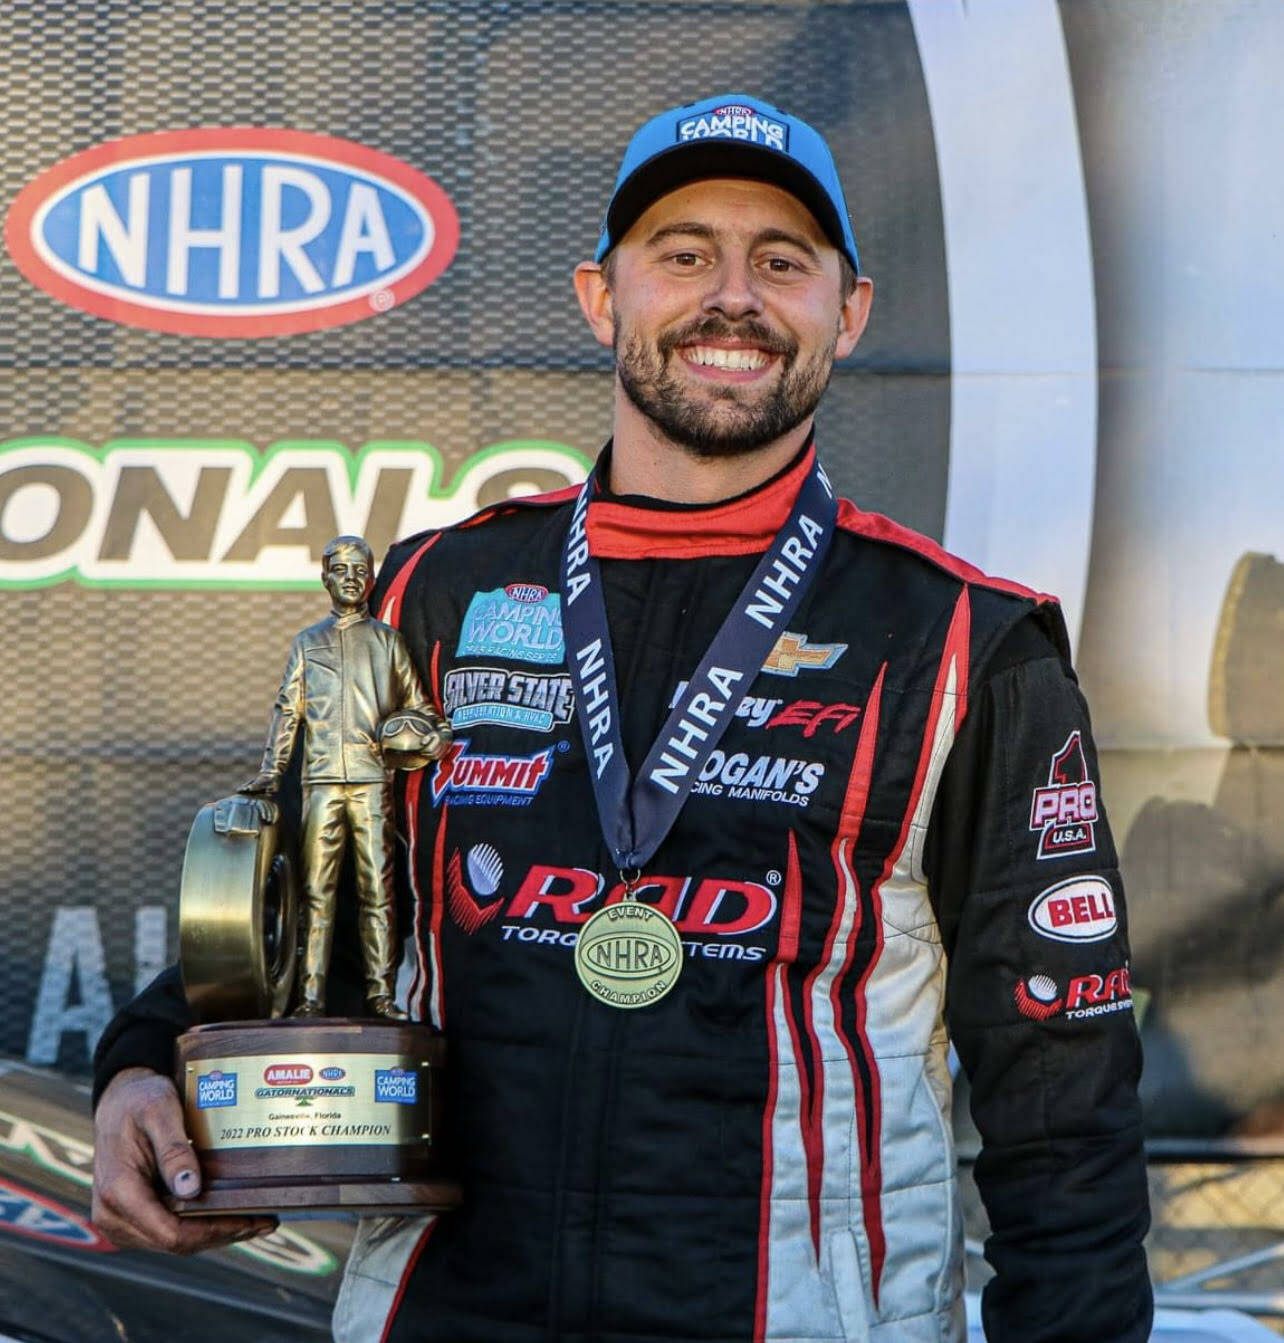 Photo courtesy of Dana Glenn
Dallas Glenn holds his trophy from his win in Gainesville, Florida, in March 2022.